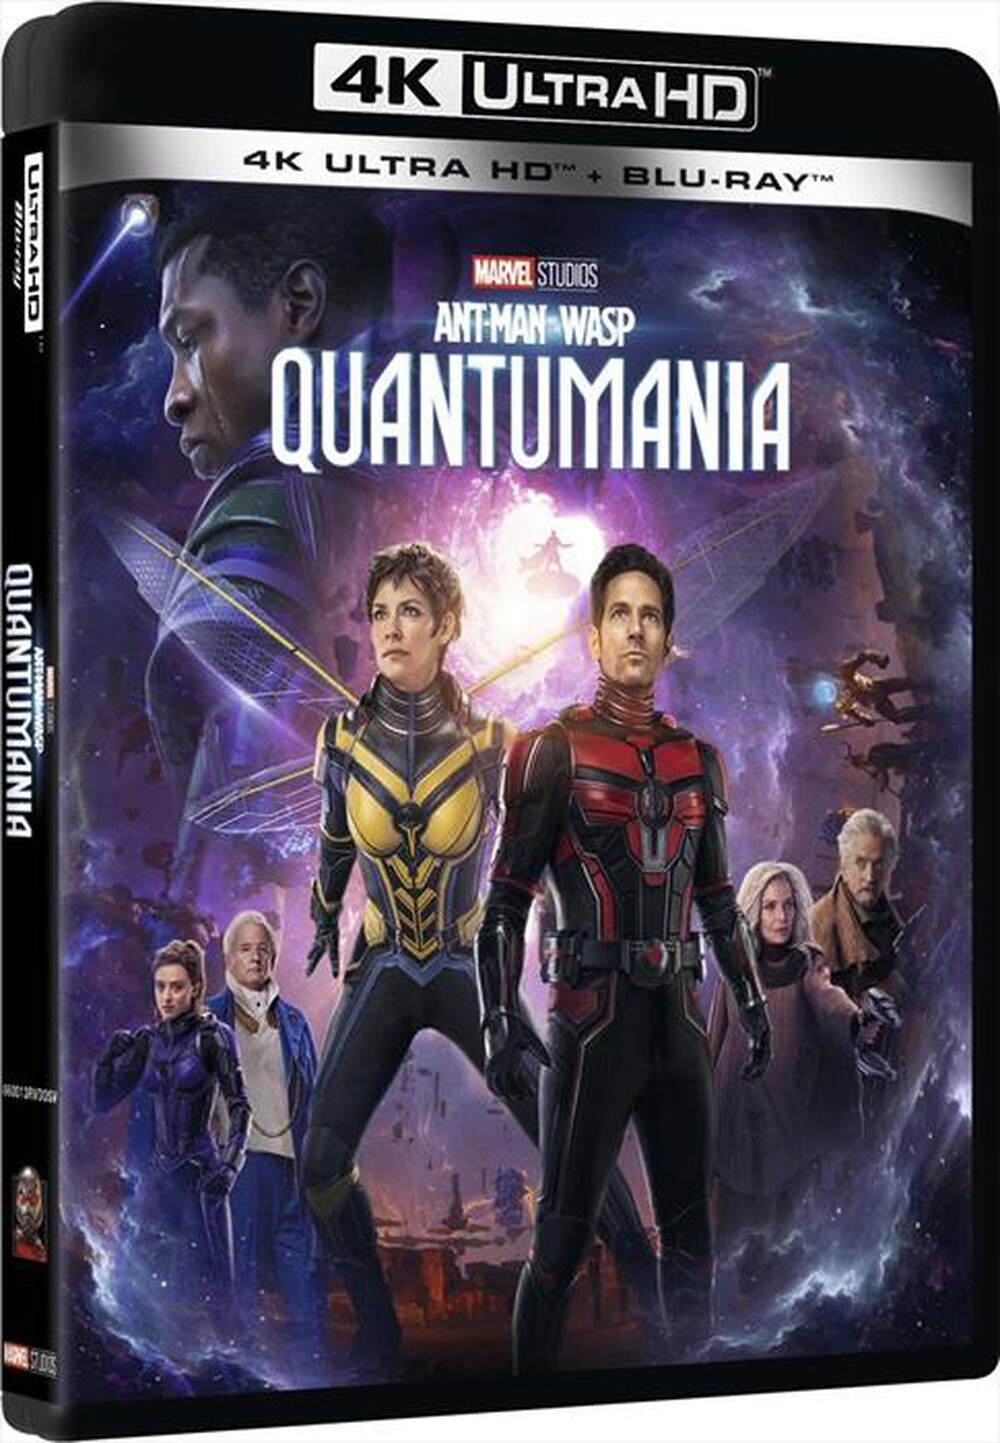 "MARVEL - Ant-Man And The Wasp: Quantumania (Blu-Ray 4K Ul"